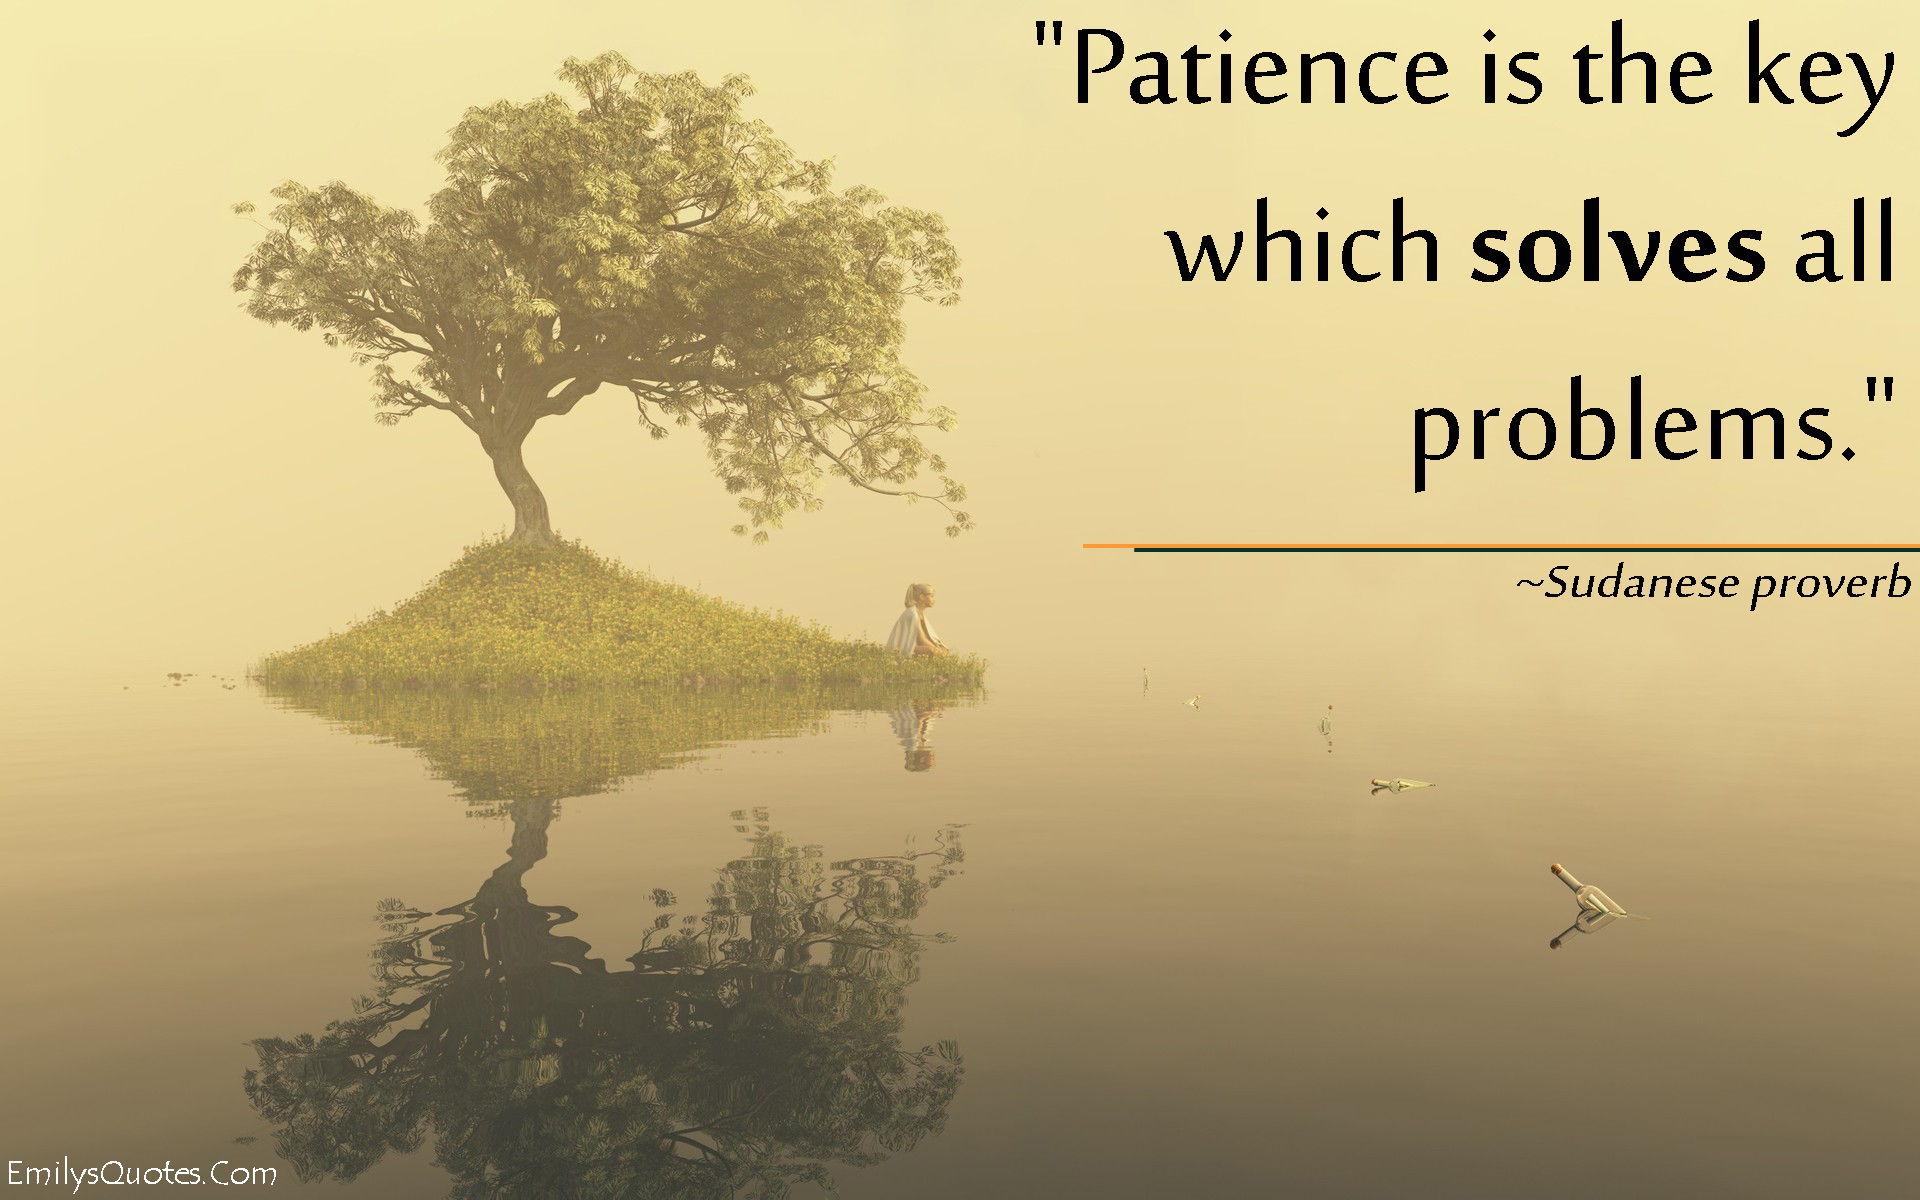 Patience is the key which solves all problems